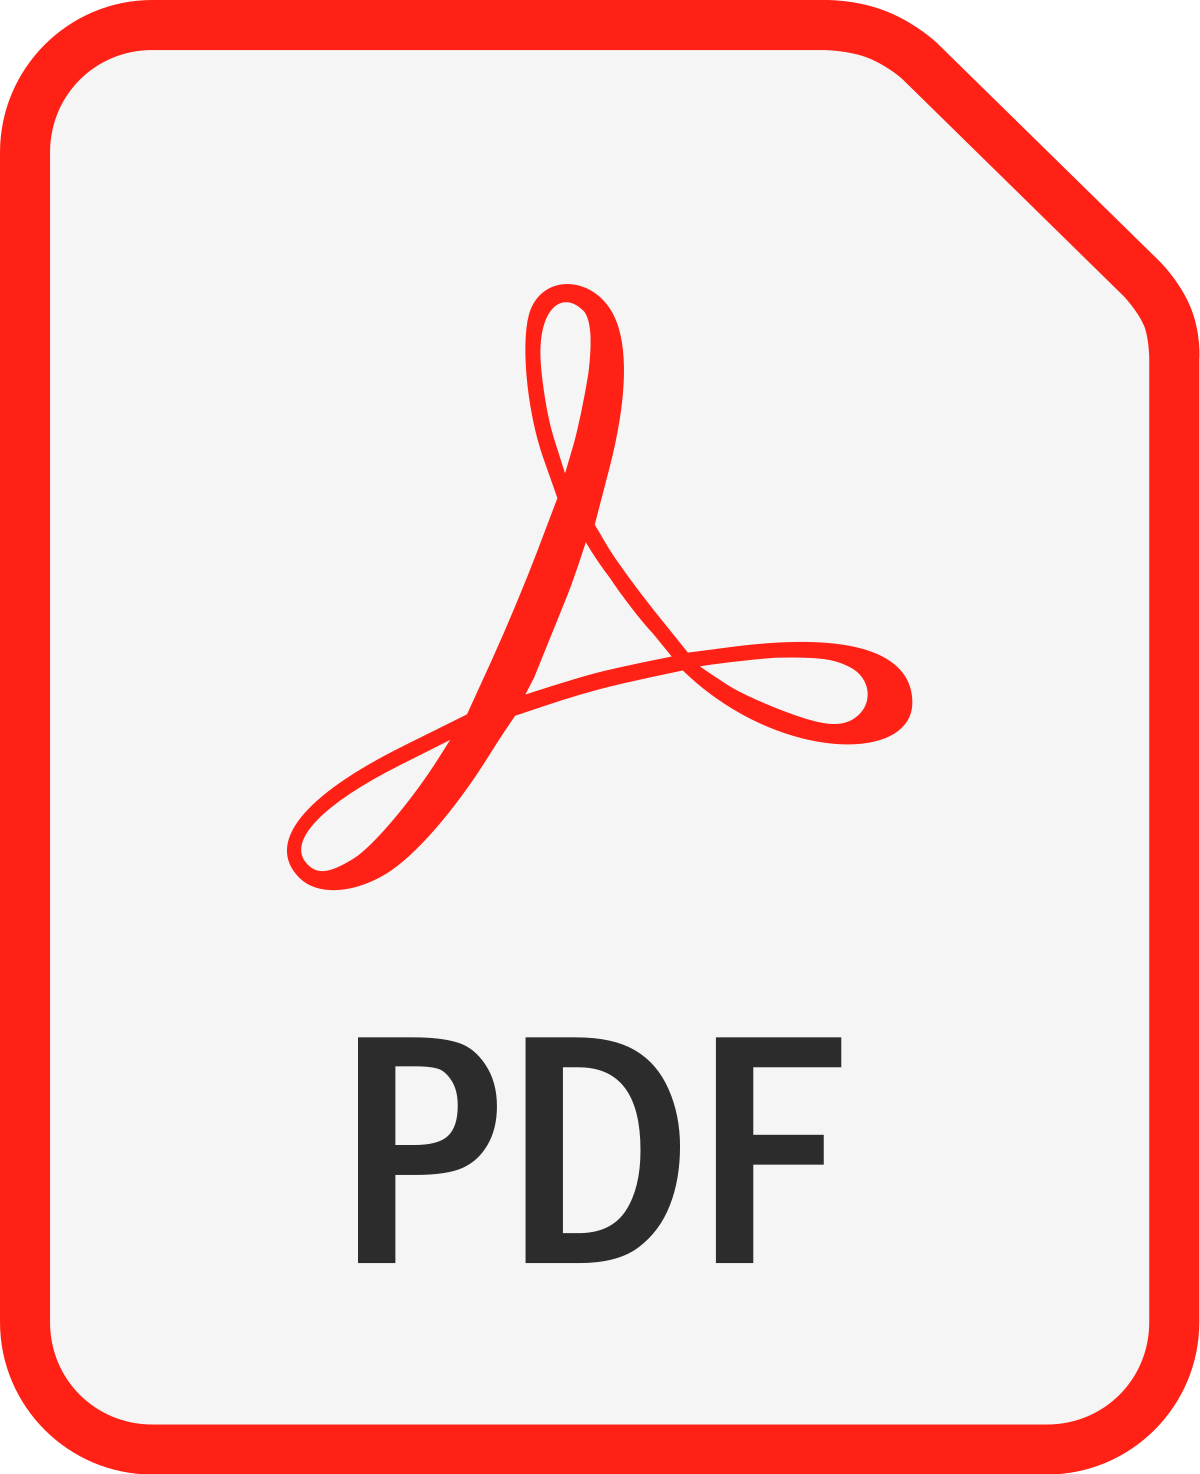 Chat with PDF